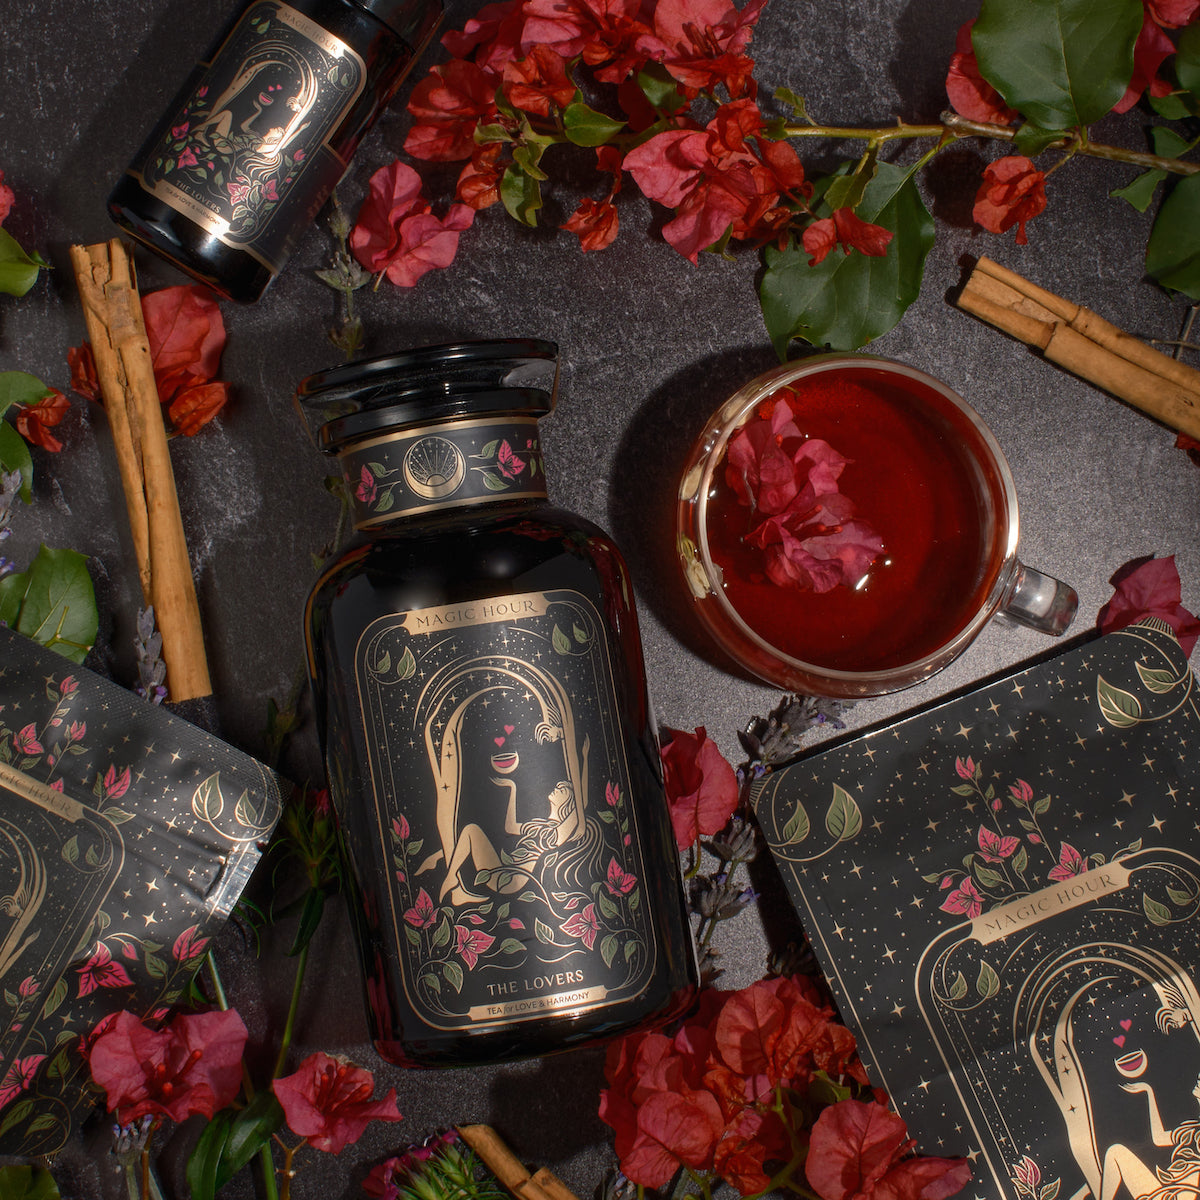 A stylized black bottle labeled &quot;The Lovers&quot; by Magic Hour is surrounded by red flowers, green leaves, cinnamon sticks, and a cup of organic hibiscus tea with flower petals. An accompanying box with mystical illustrations complements the bottle in a sophisticated, nature-themed flatlay.